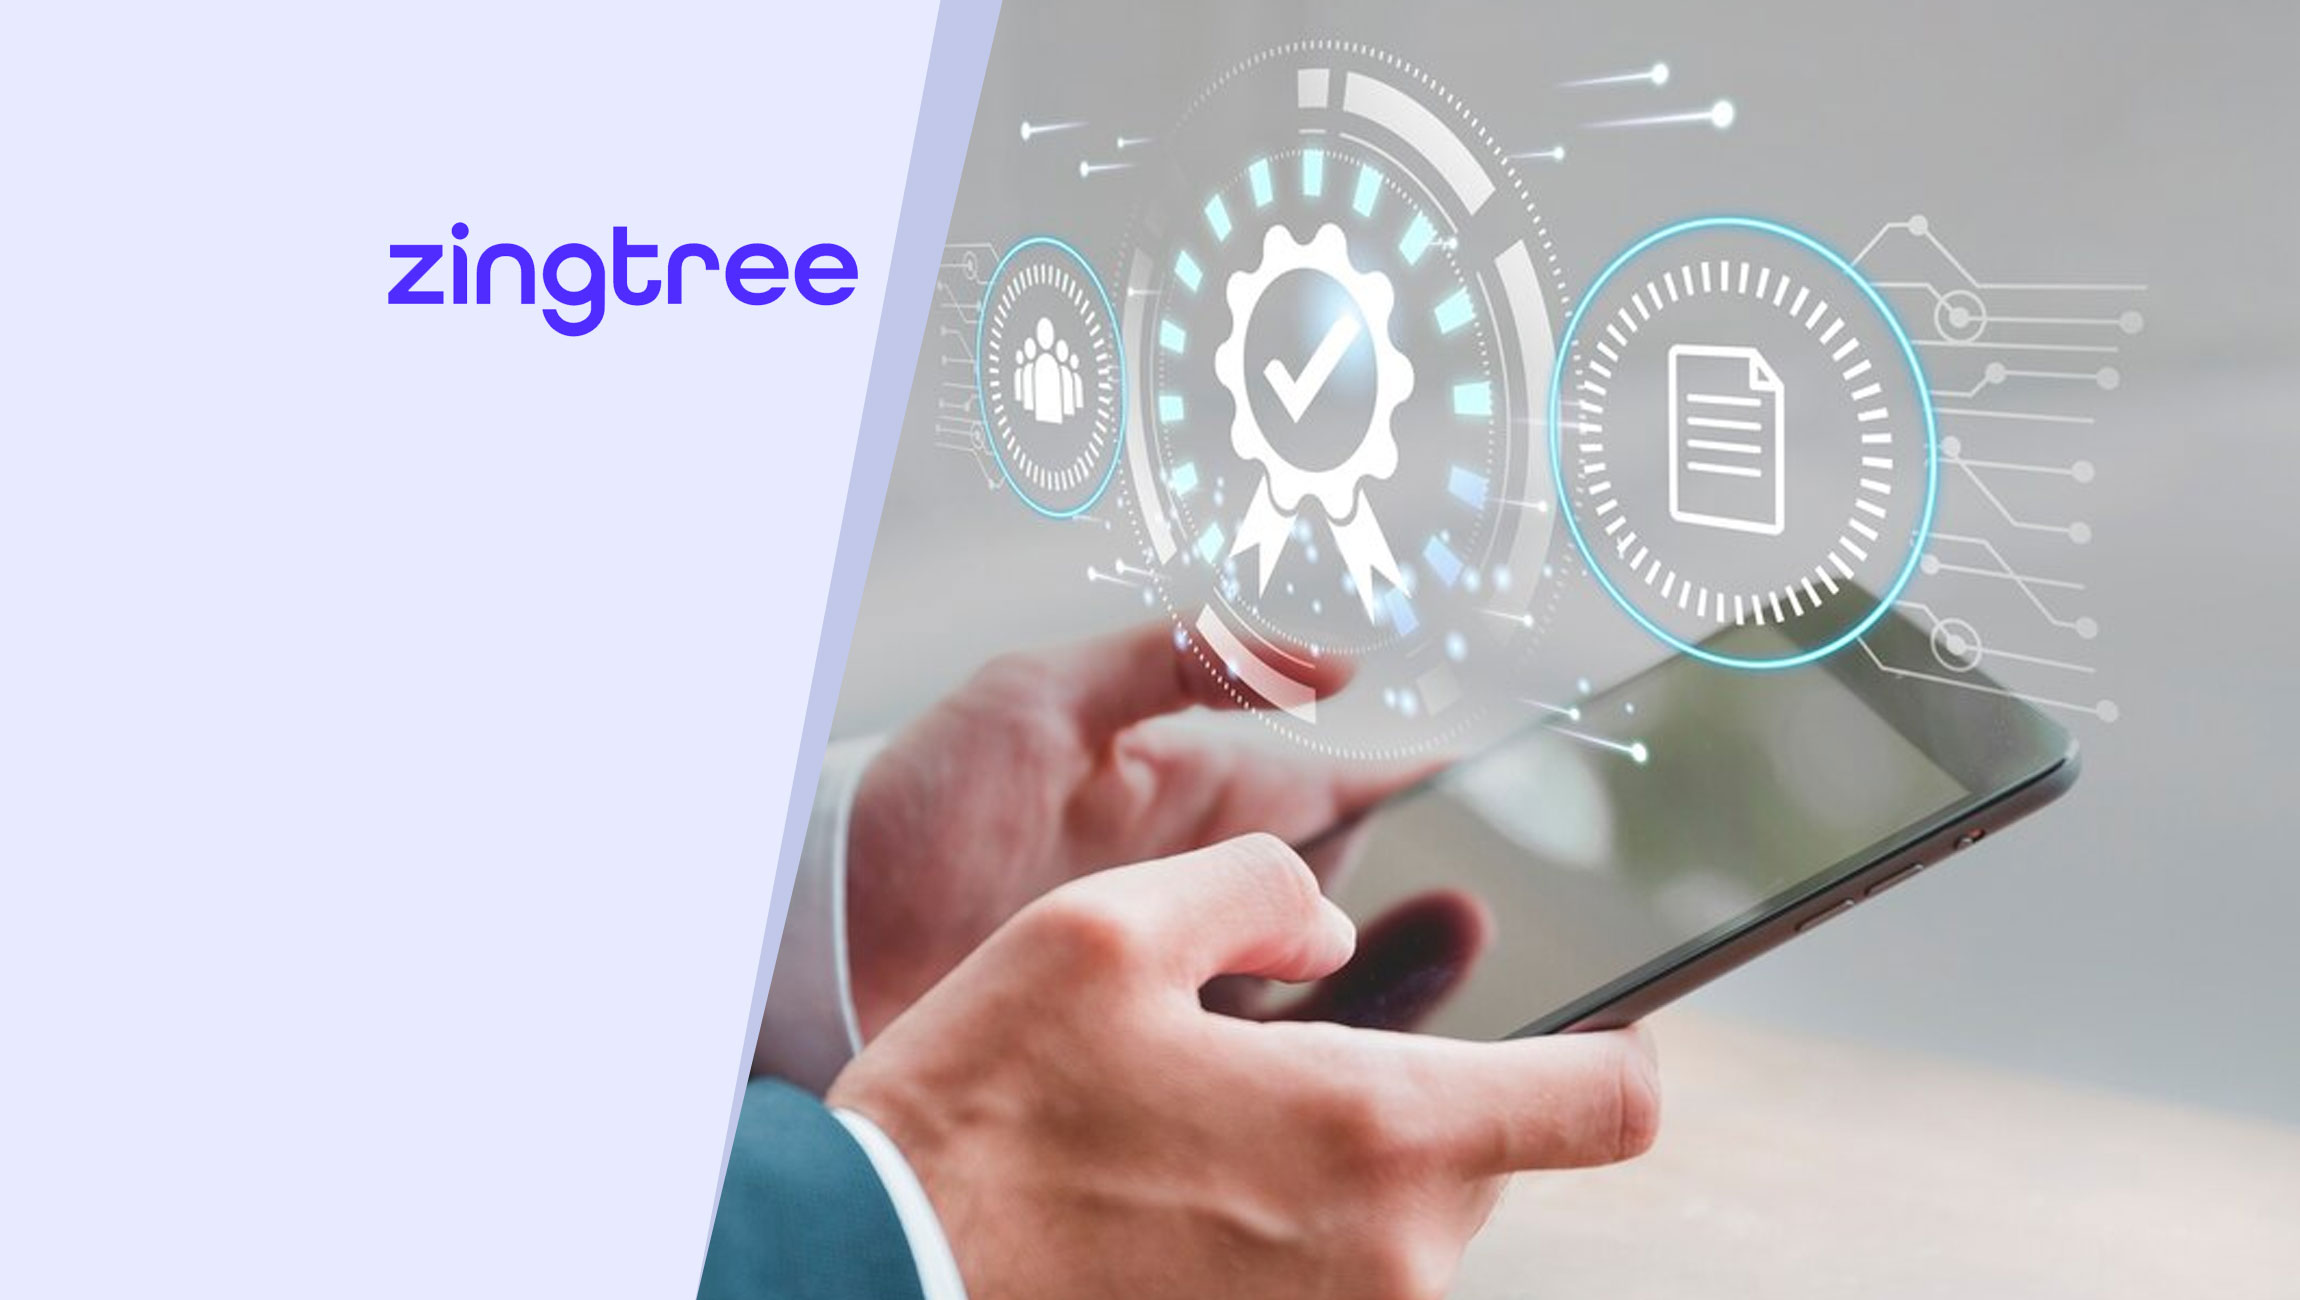 Zingtree Launches CX Answers and Actions to Automate and Optimize Interactions for Happier Customers and Reps